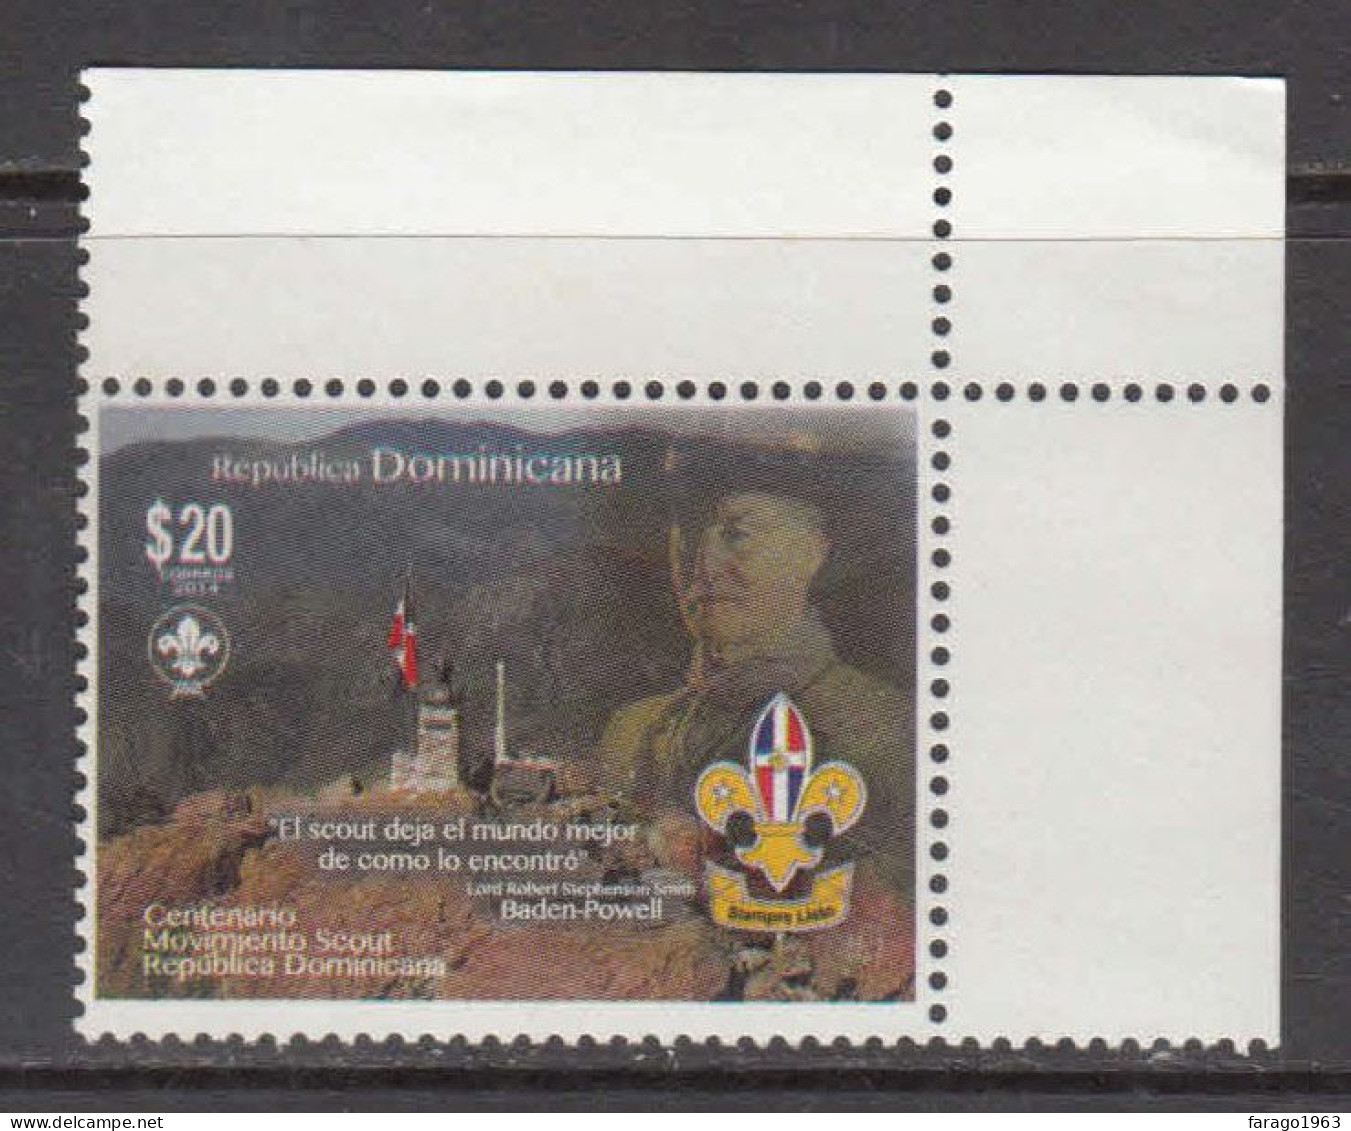 2014 Dominican Republic Dominicana Scouting Baden Powell  Complete Set Of 1 MNH - Dominican Republic